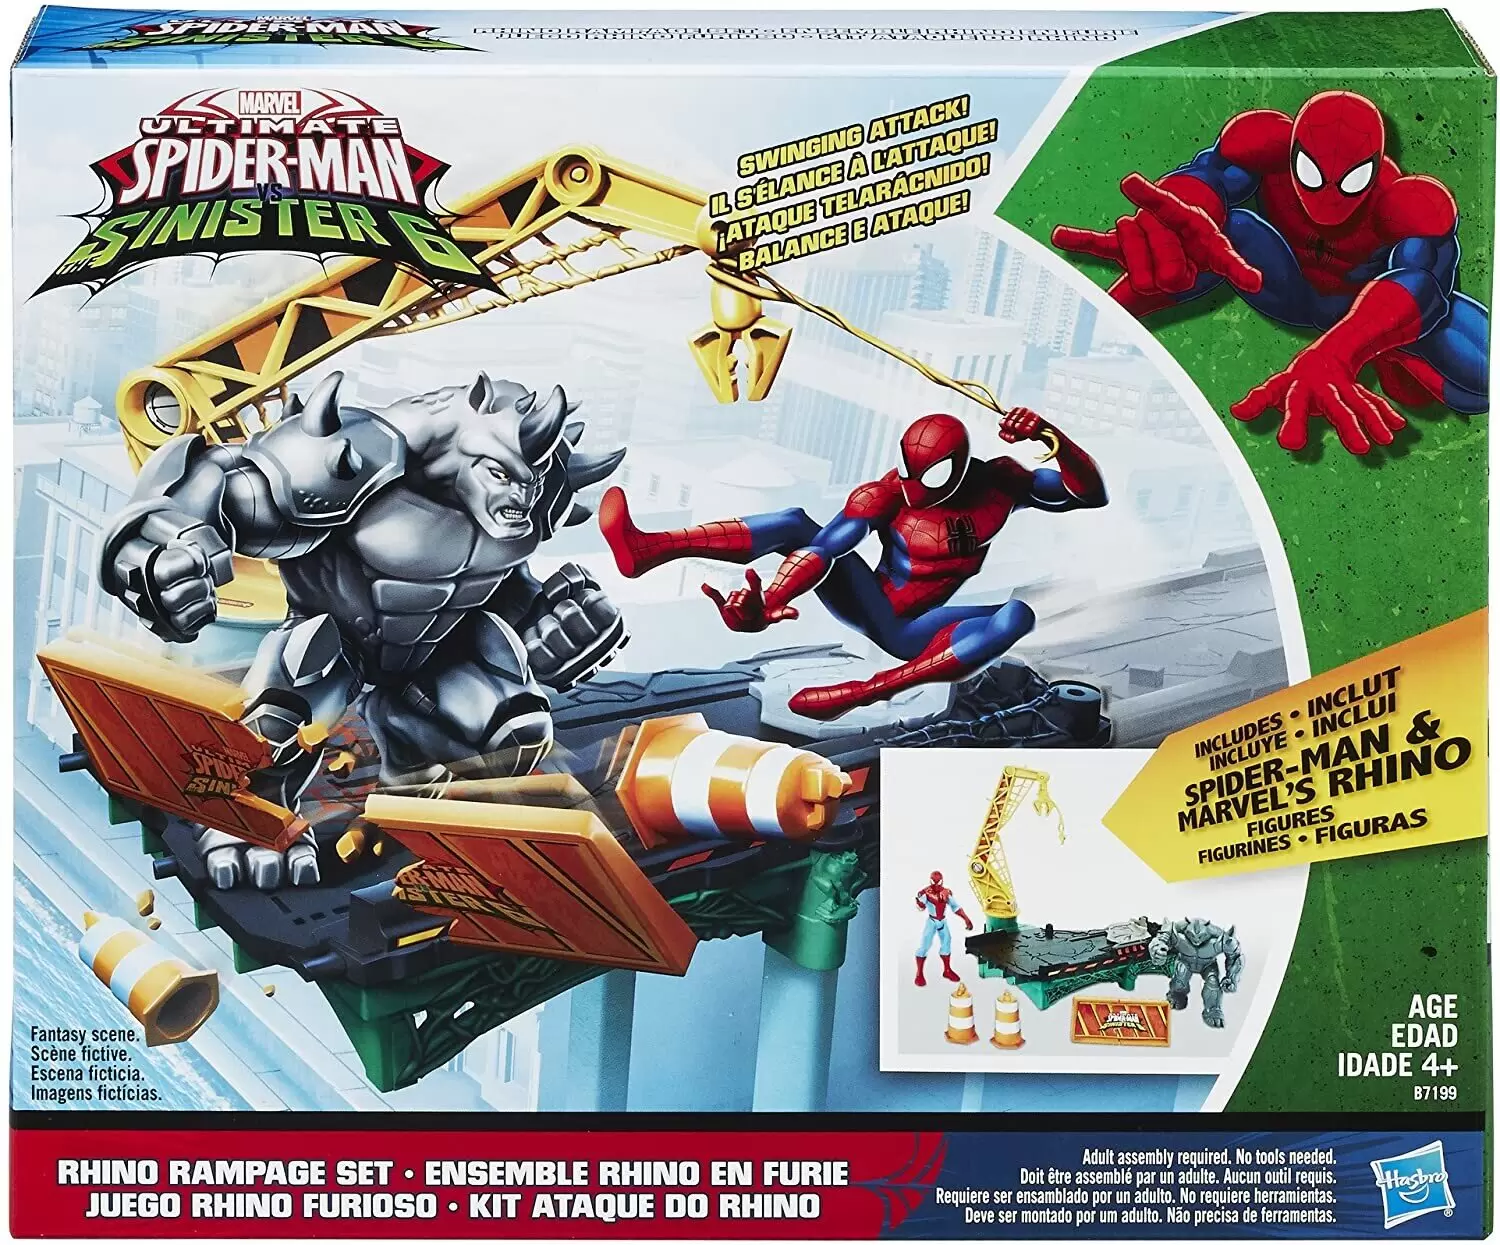 Rhino Rampage - Ultimate Spider-Man Vs The Sinister 6 action figure